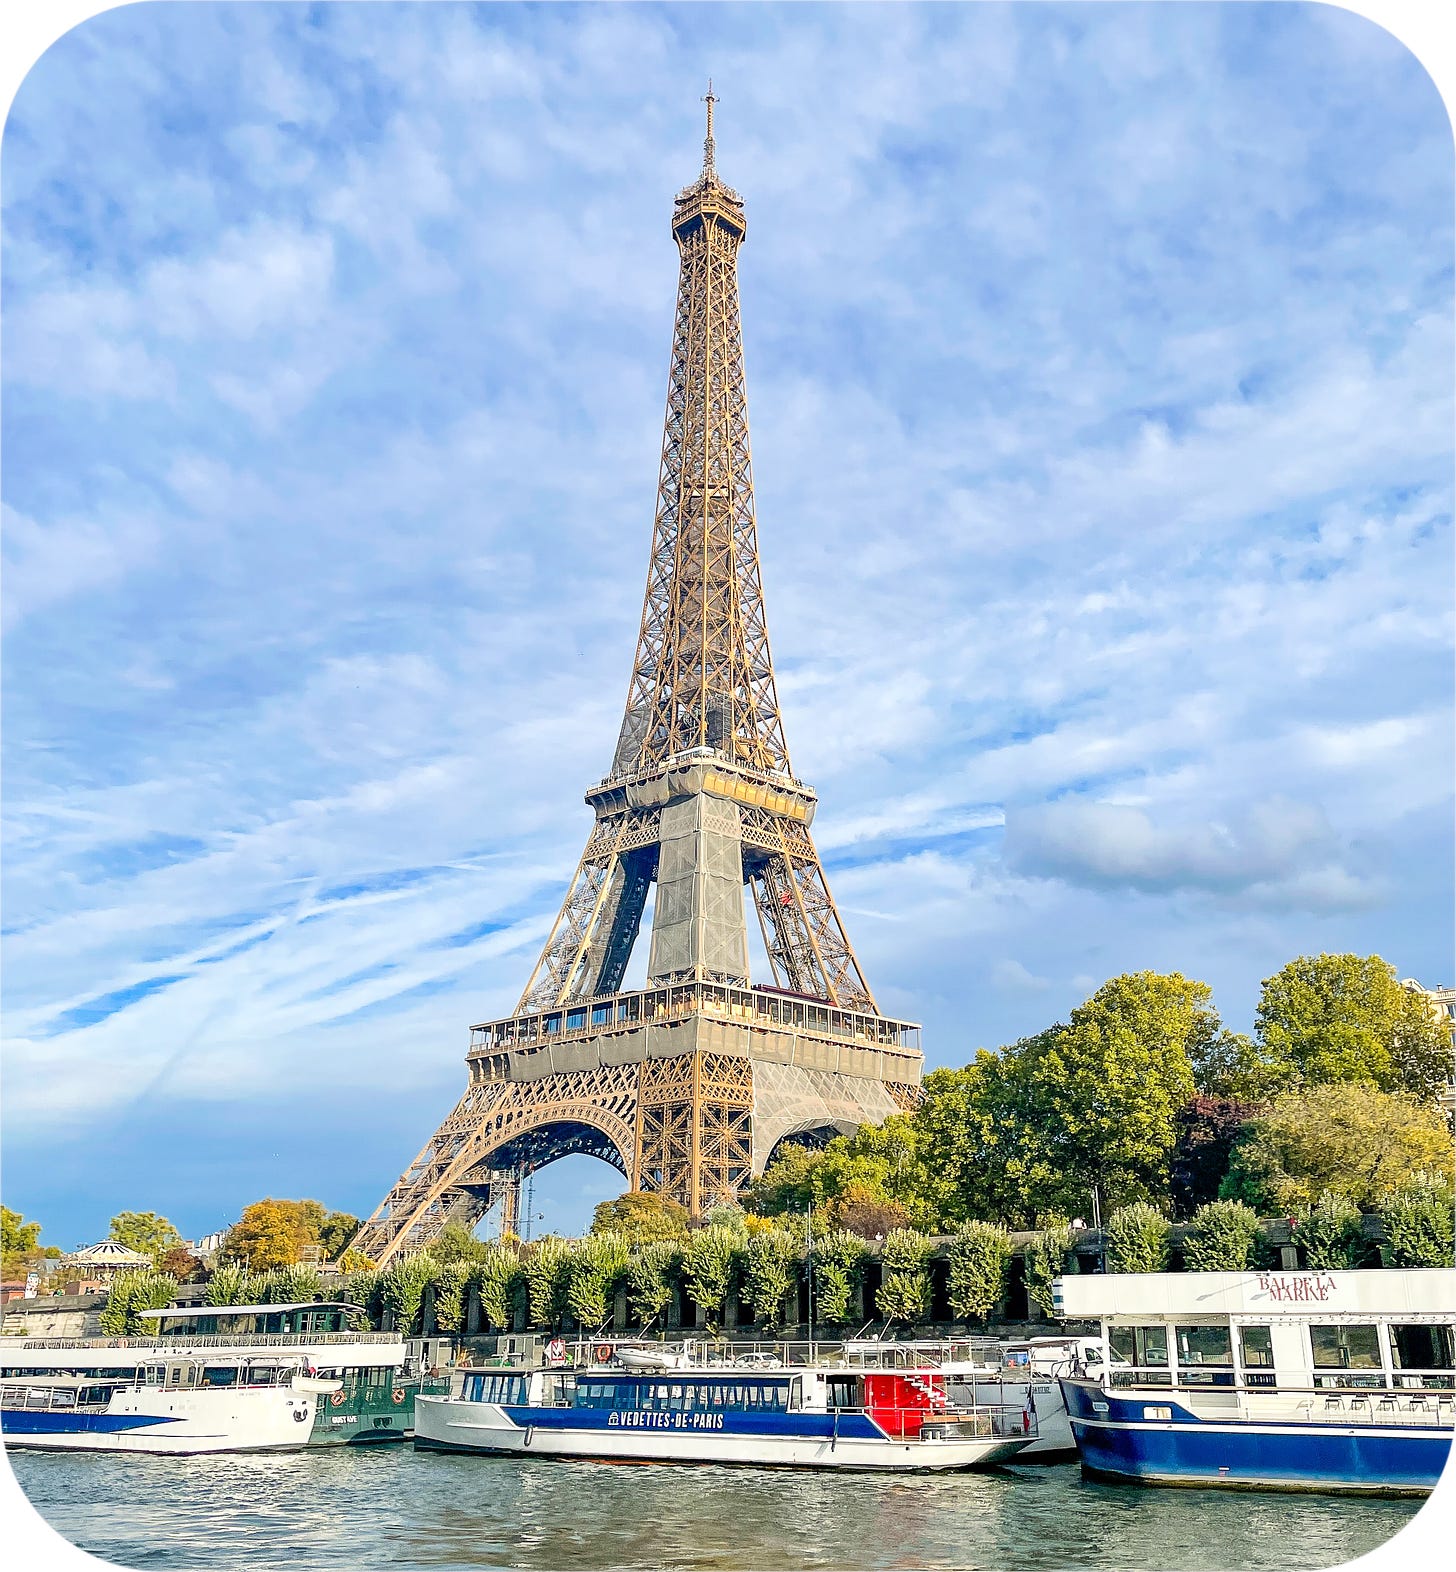 Passing by the Eiffel Tower on a bateau-mouche.